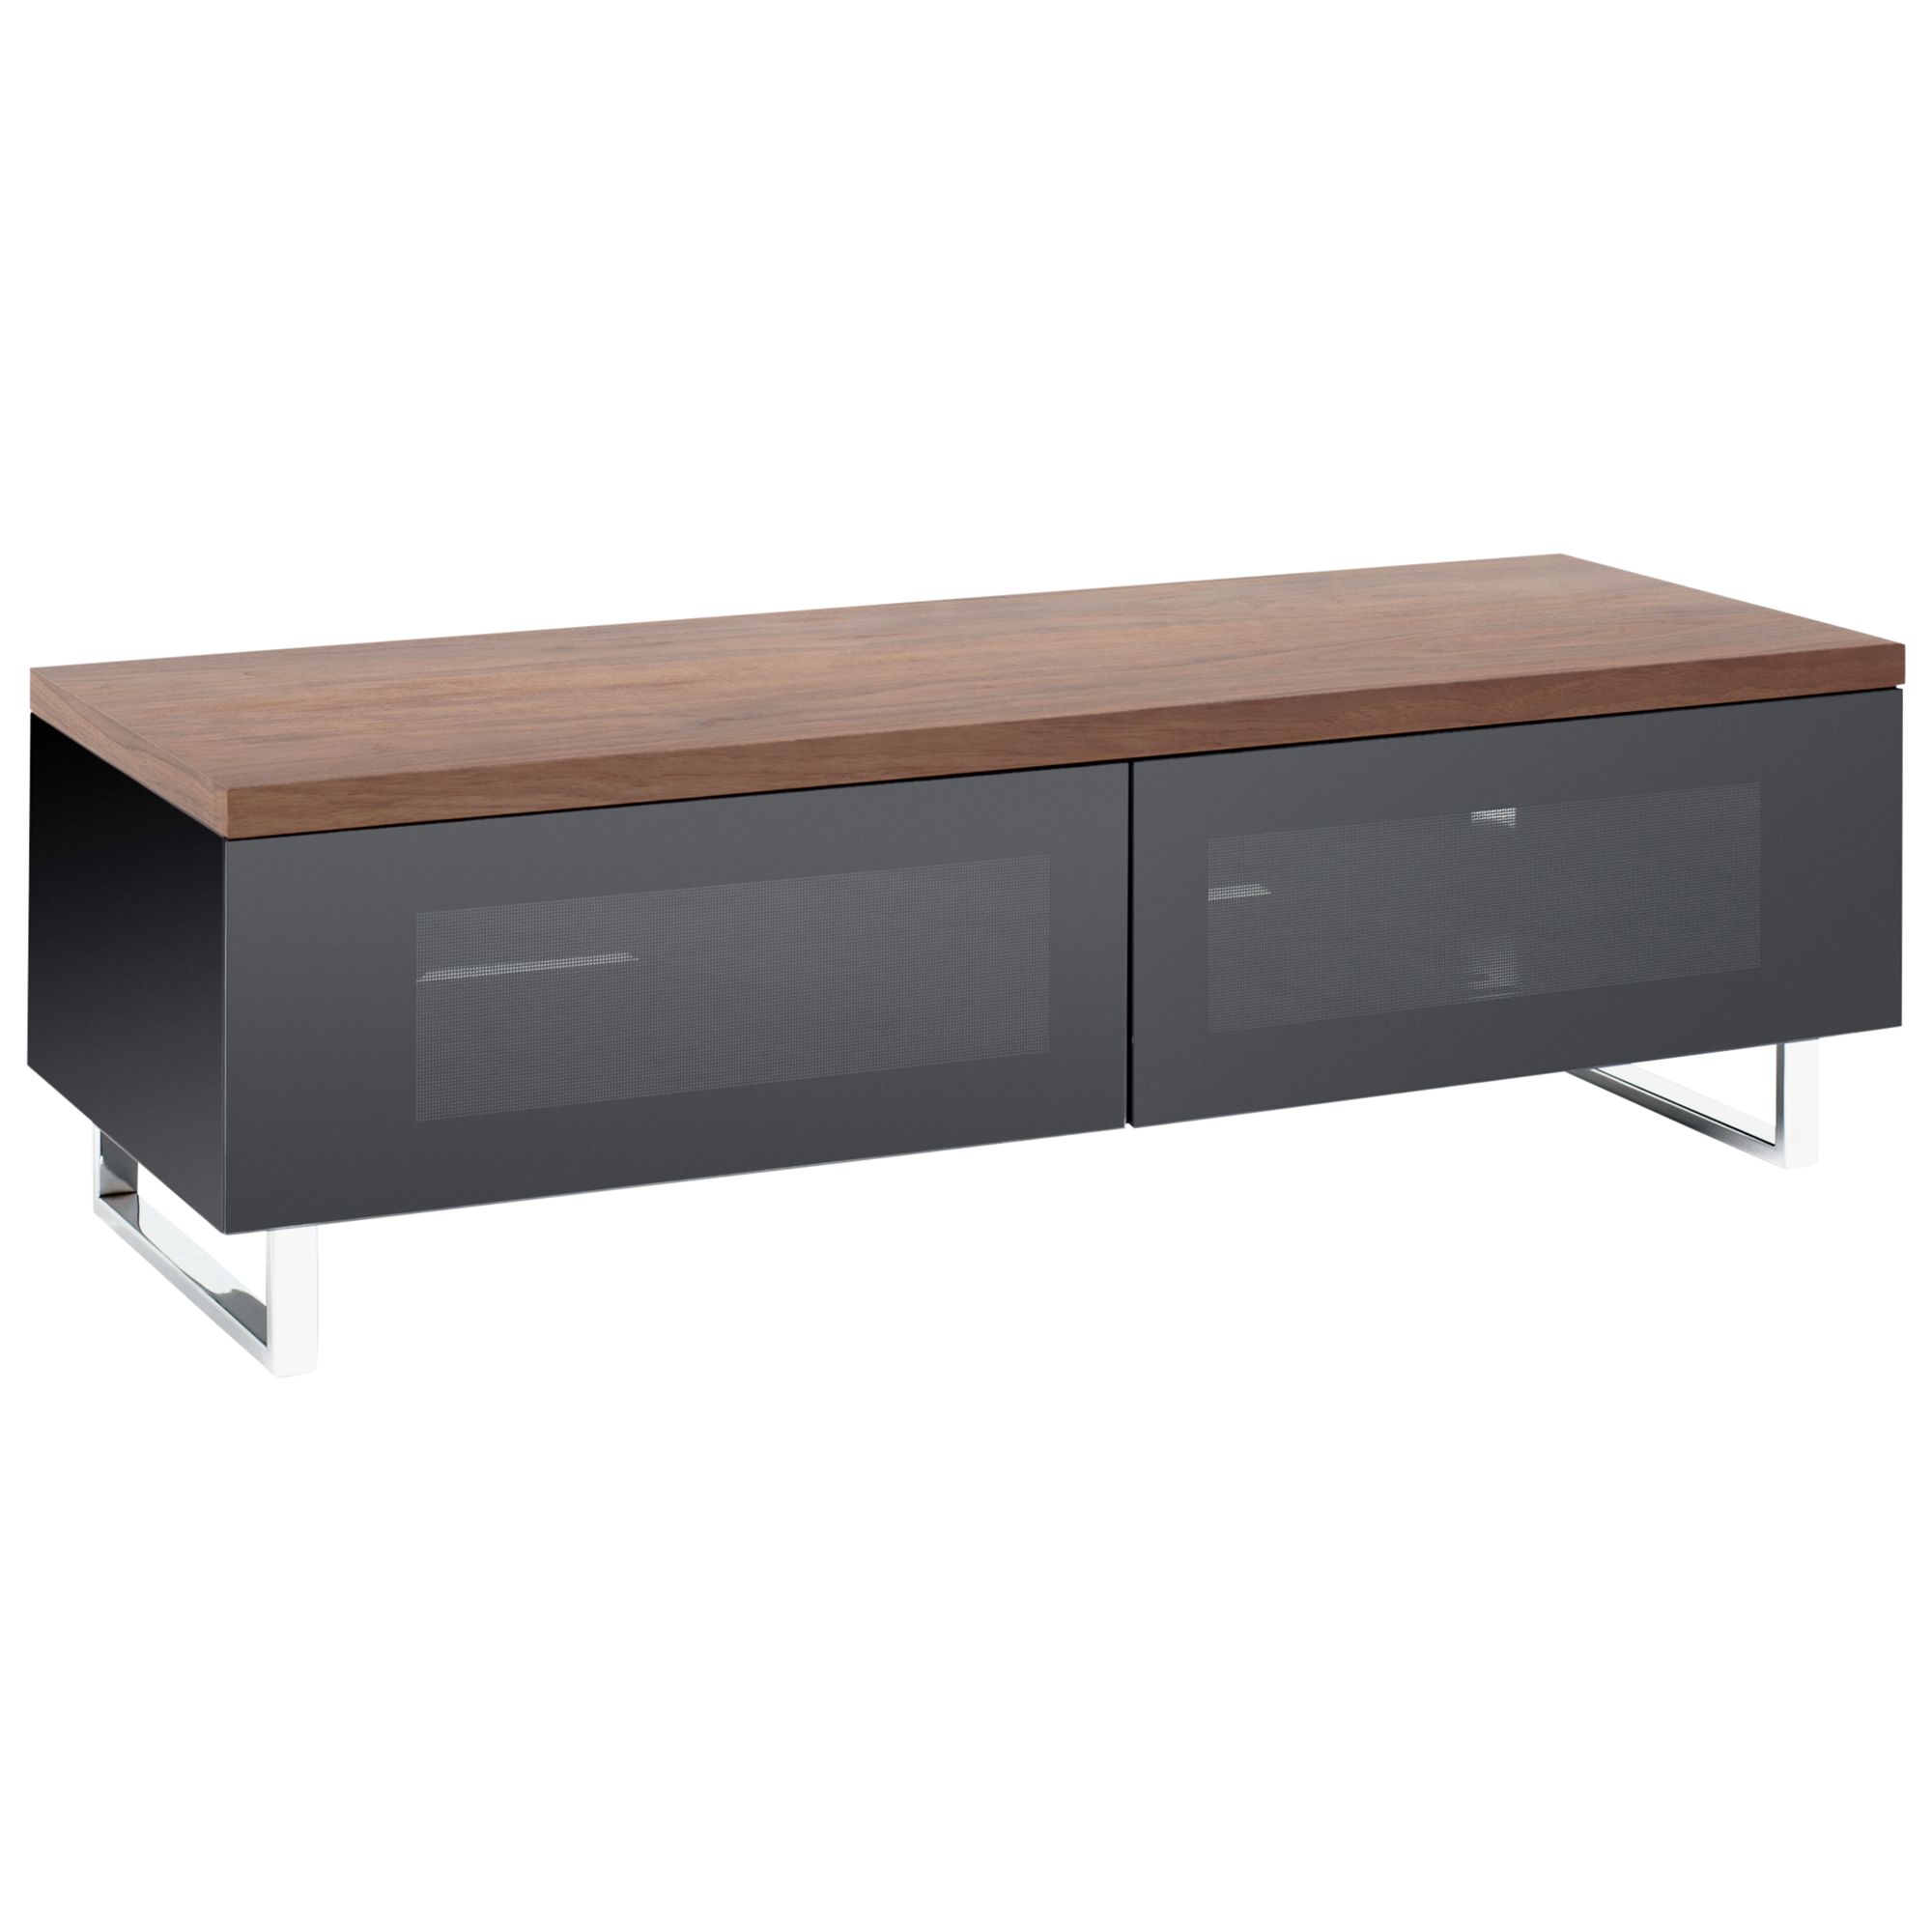 Techlink Panorama PM120 TV Stand for TVs up to 55"